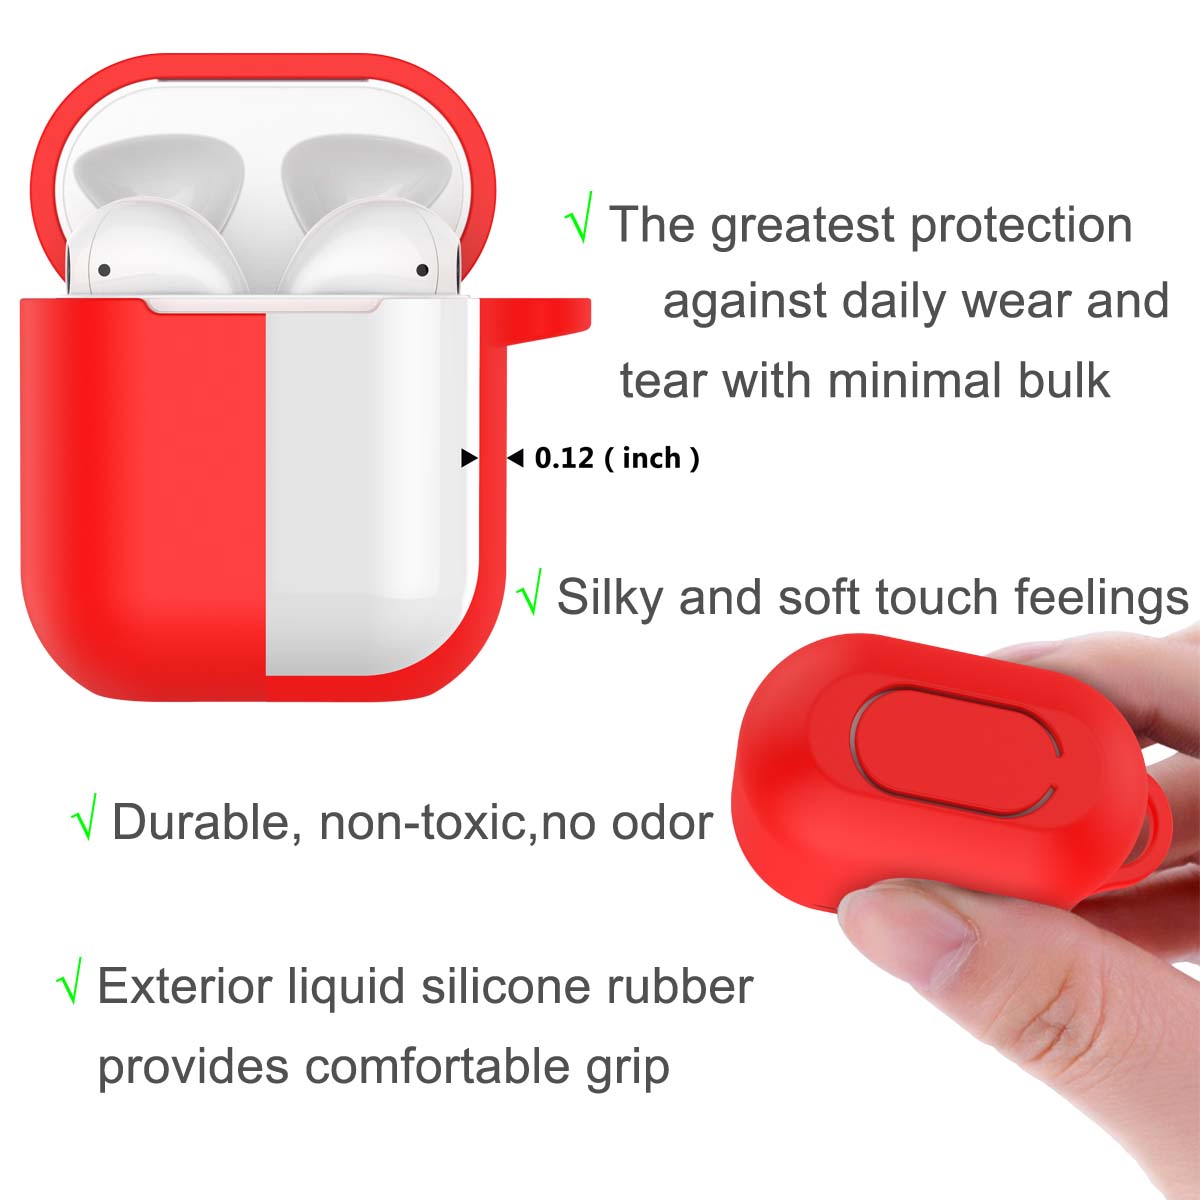 Apple Airpods 2 Skin, For Airpods Charging Case fur Ball for Airpods 2nd, Takfox Scratch-Resistant 360° Protective Portable Liquid Silicone Cover Skin For Airpods 2 Rubber Accessories + Keychain - image 5 of 6